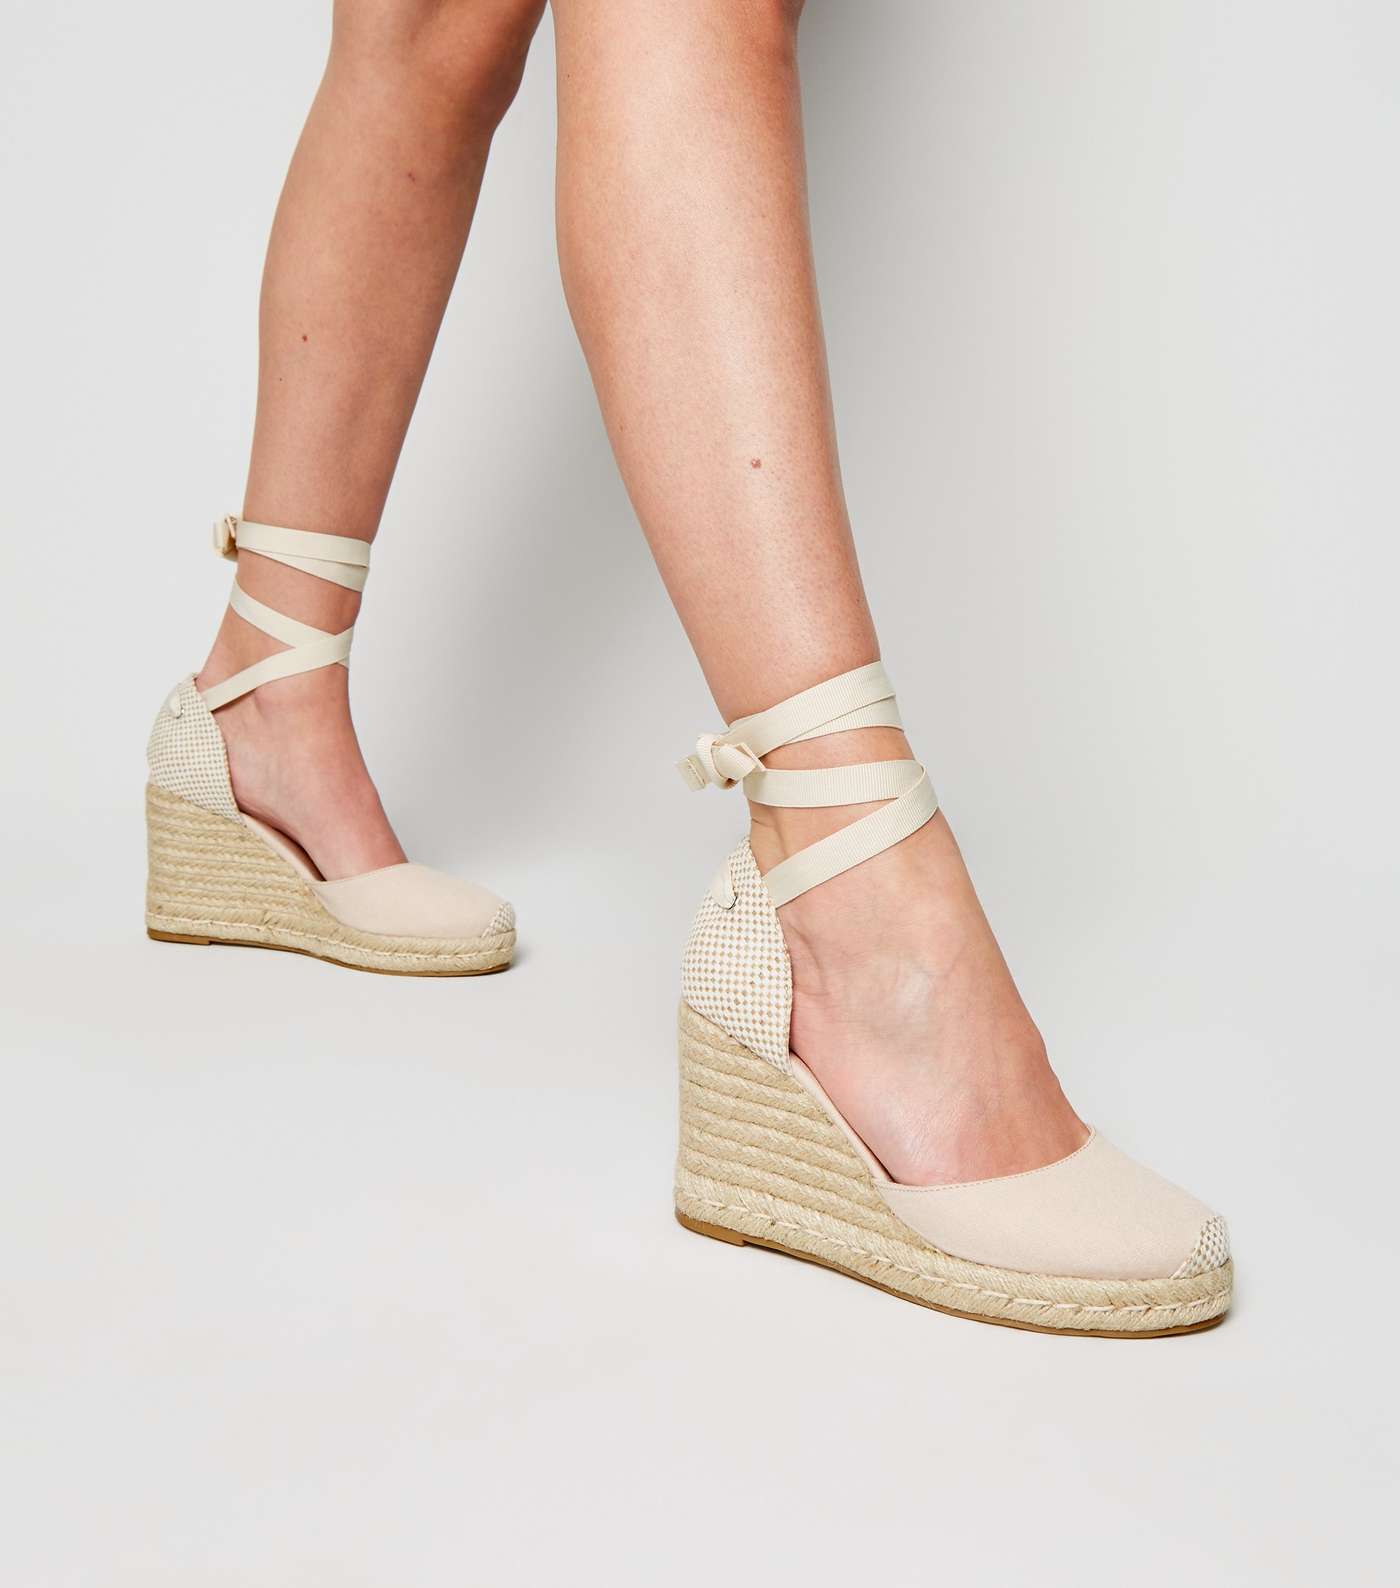 Nude Ribbon Ankle Tie Espadrille Wedges Image 2